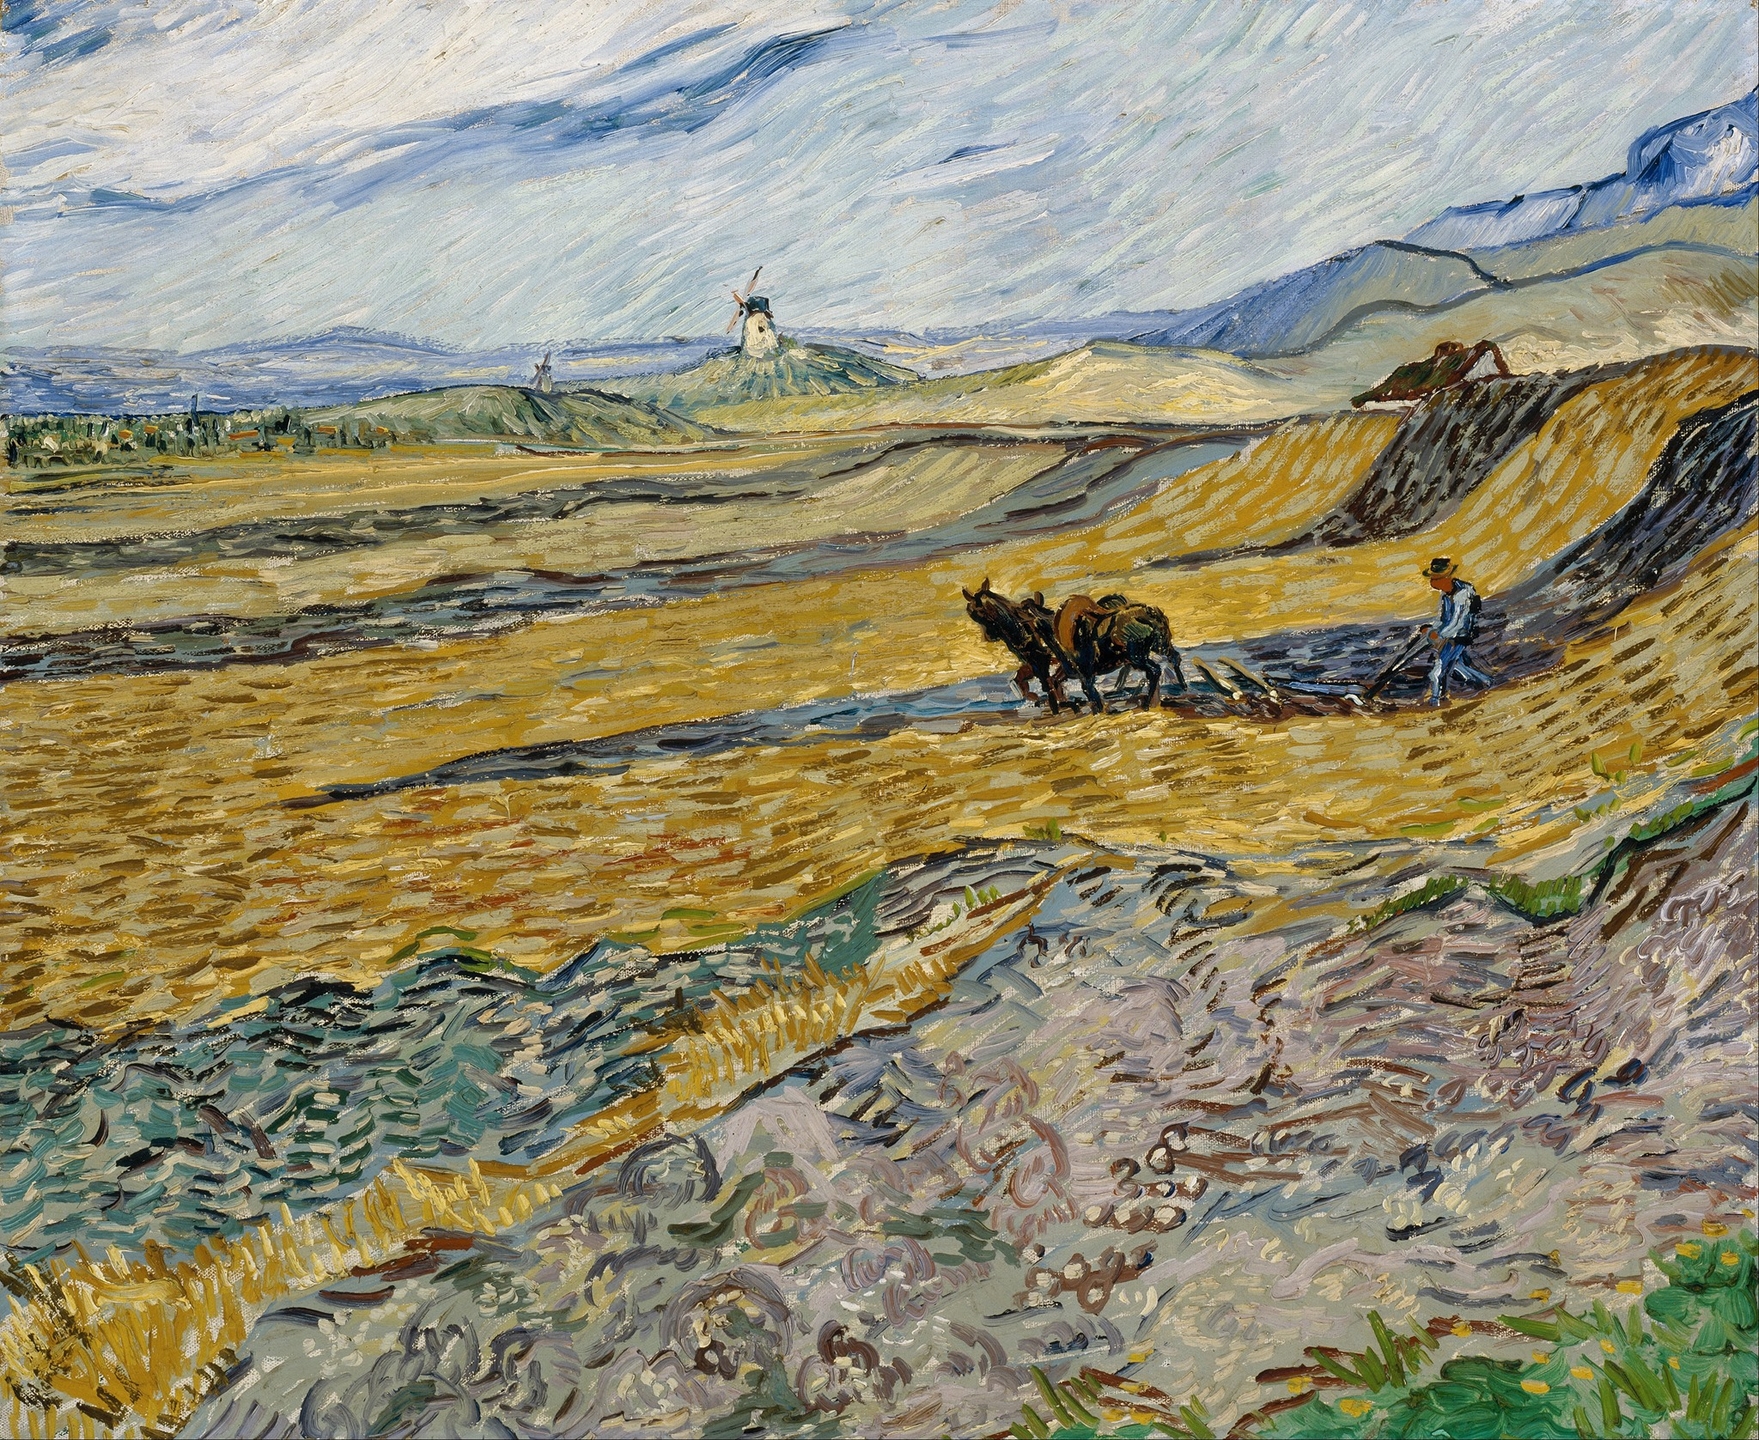 Did Van Gogh paint when he was ill?